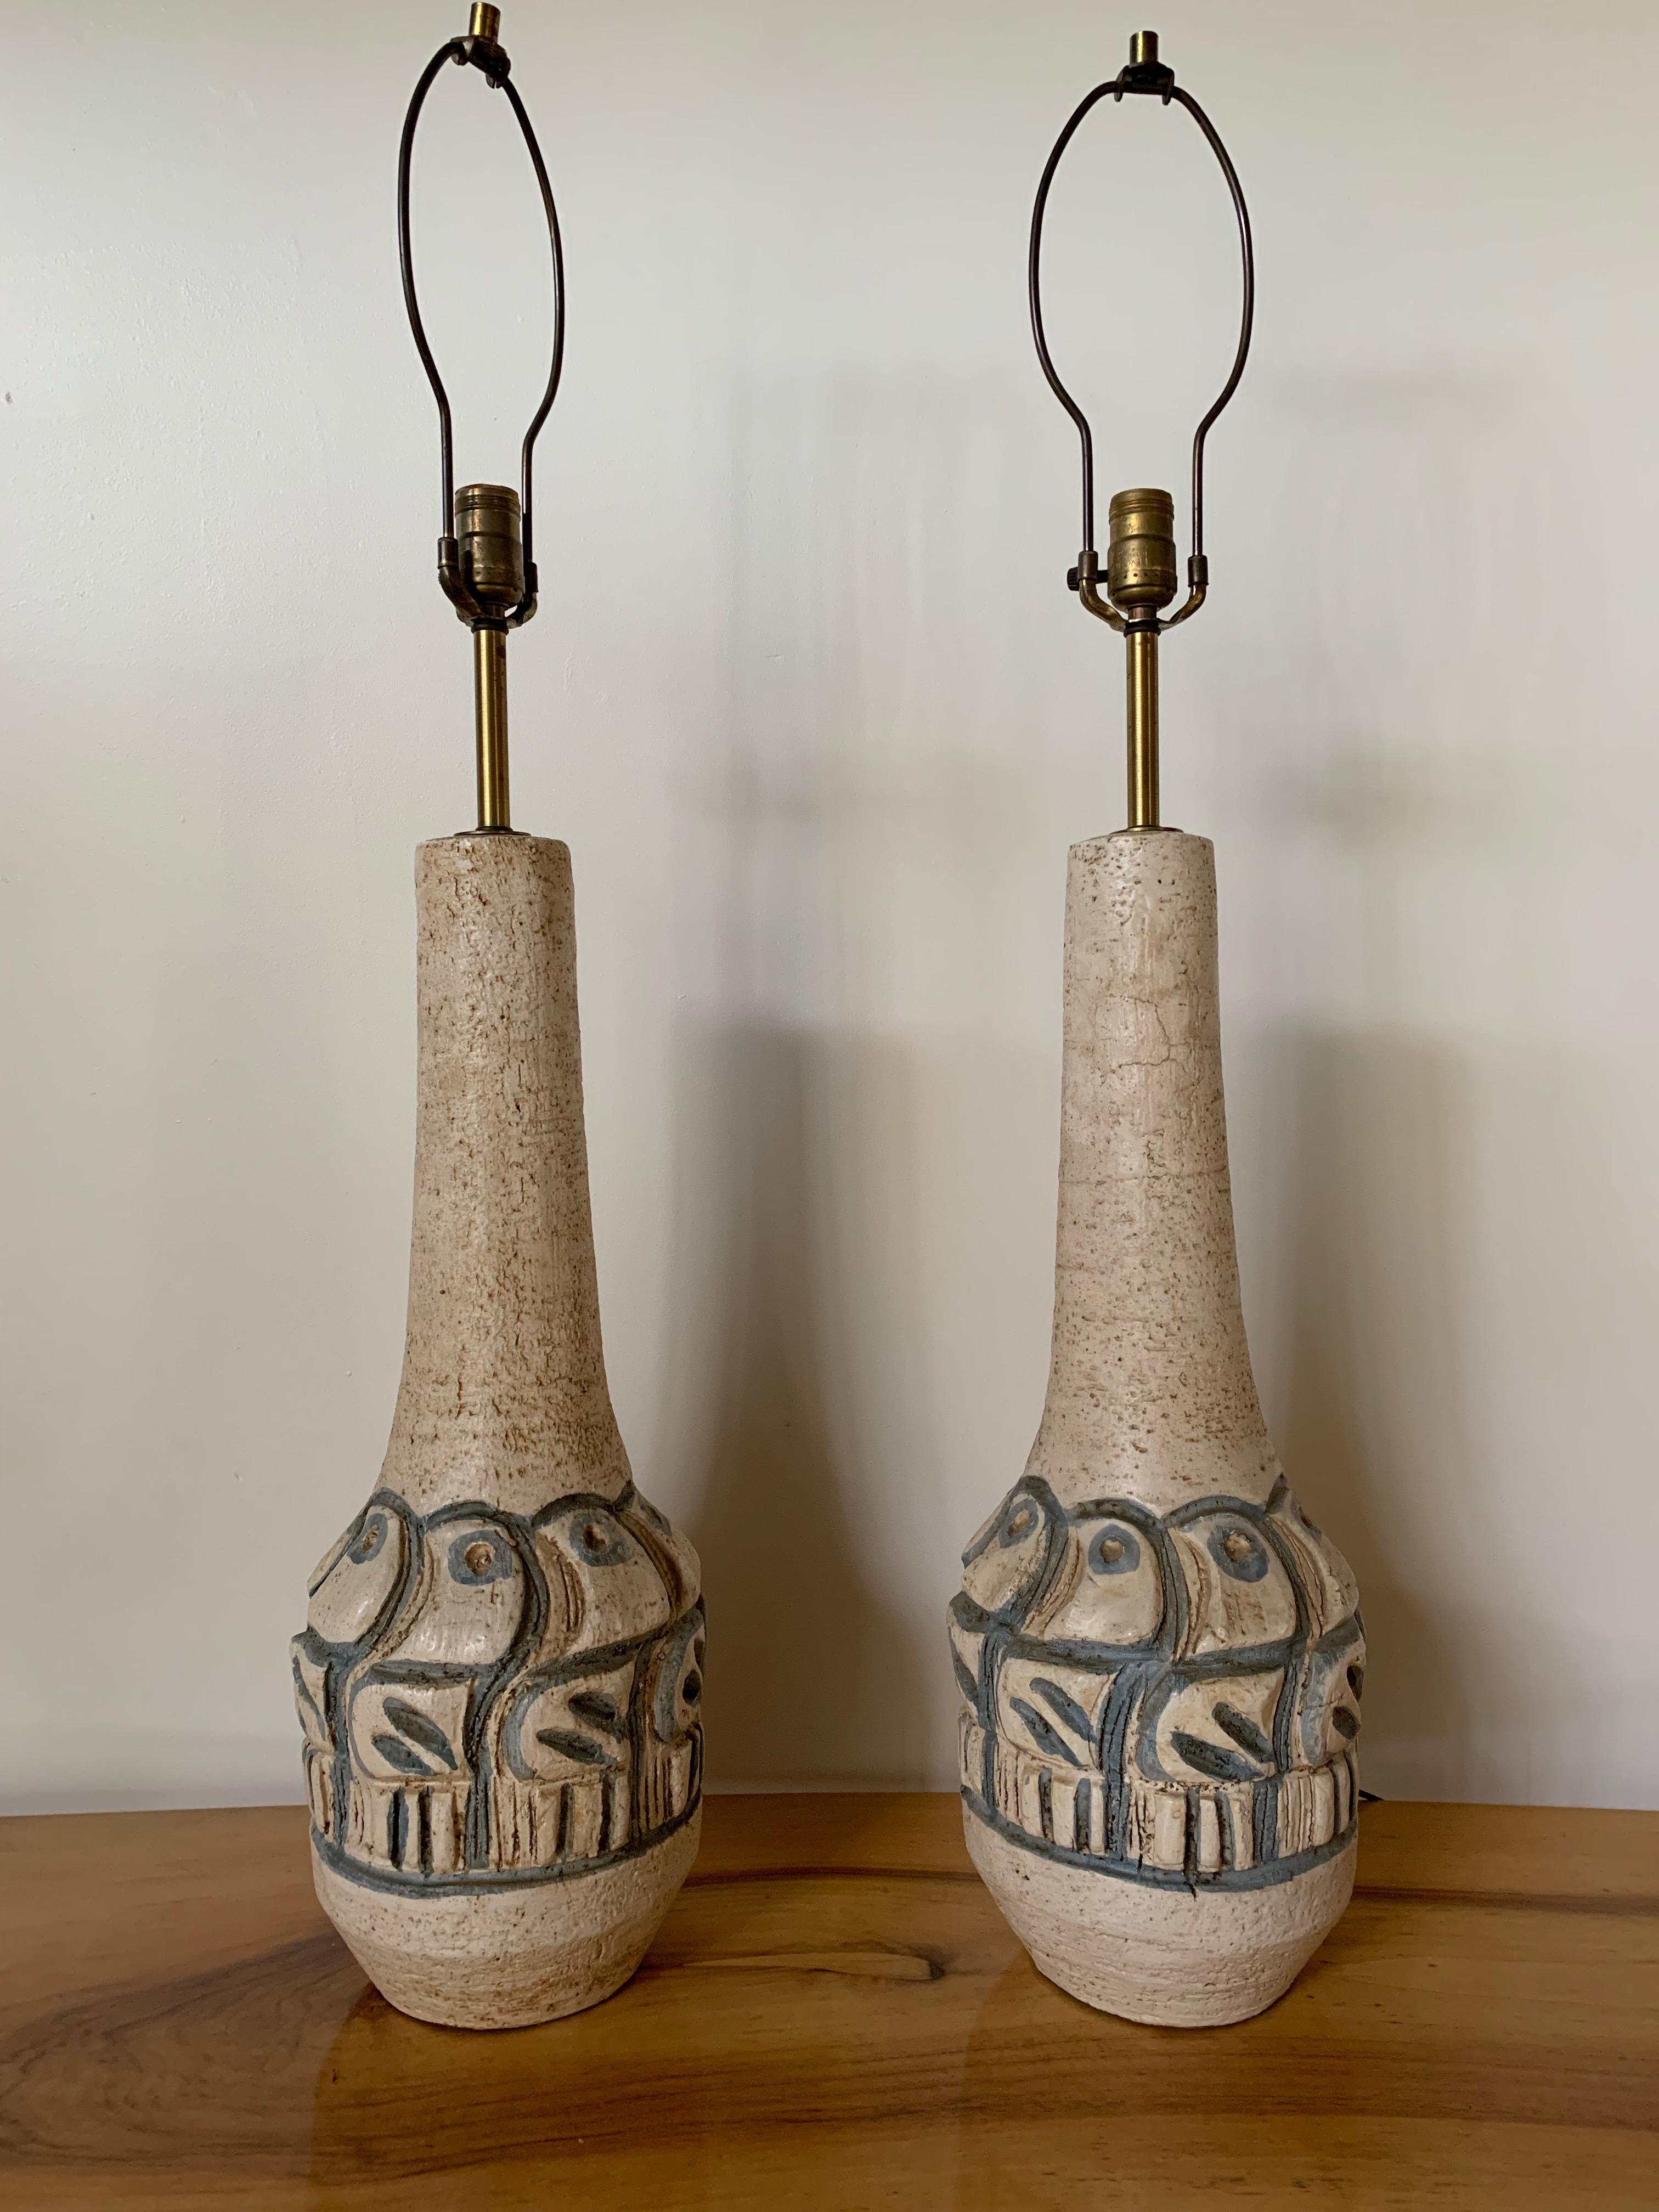 Wonderful ceramic lamps in an ecru color with deeply incised and stylized blue birds in the style of Gli Etruschi. These lamps are impressive in height with quality brass hardware. These lamps present very well.